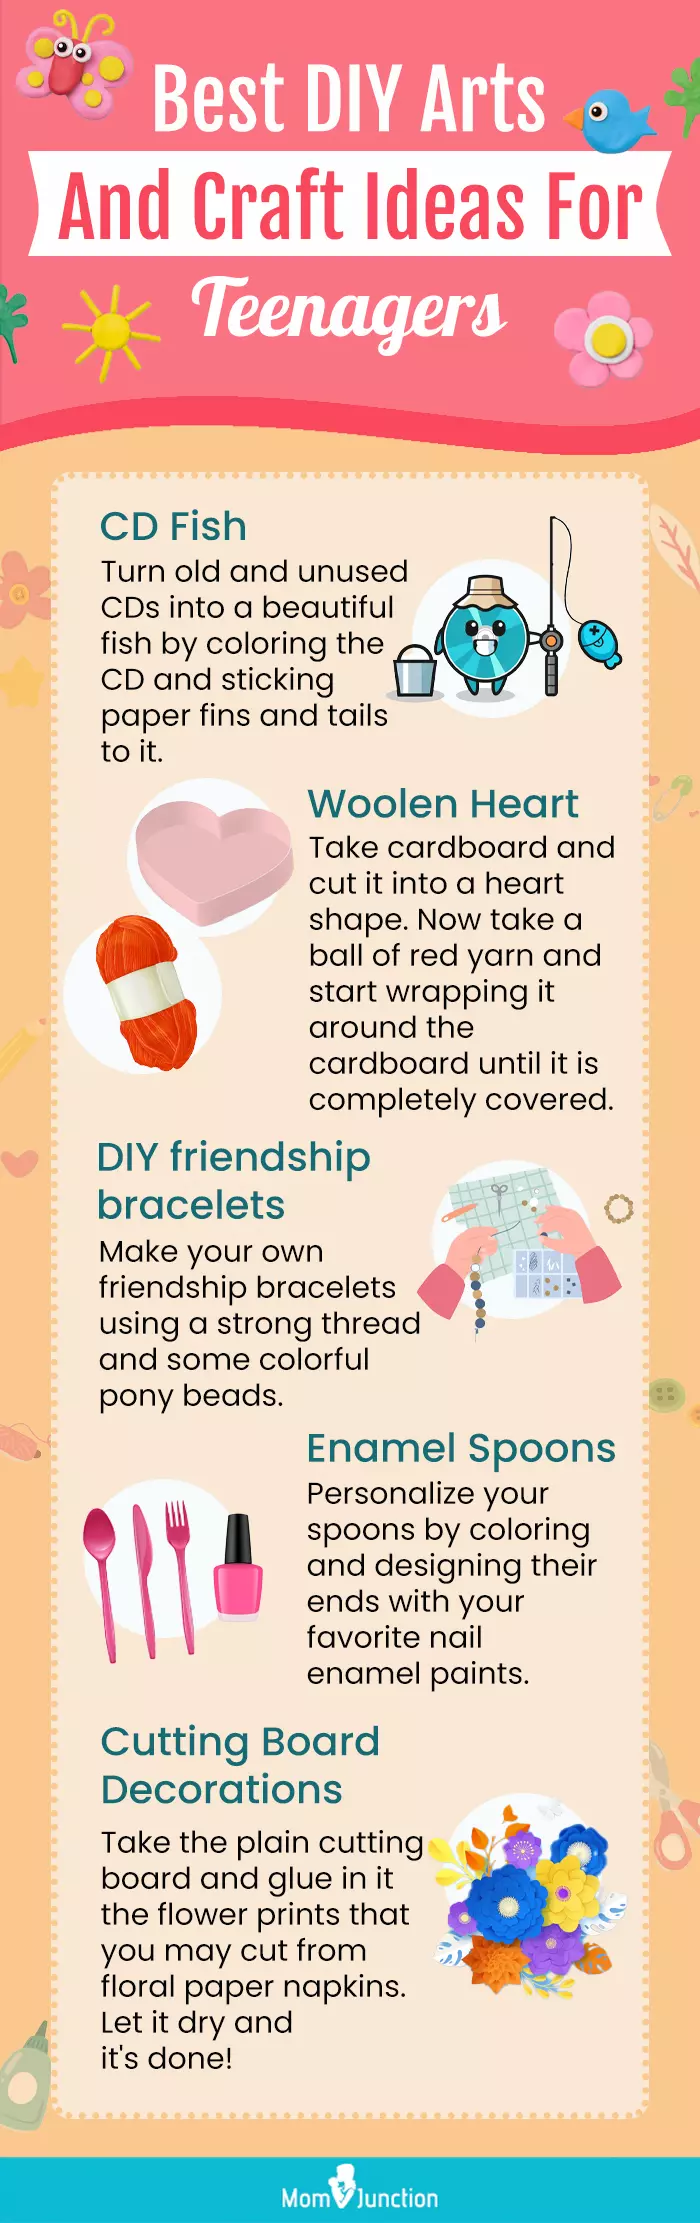 diy arts and craft ideas for teenagers (infographic)